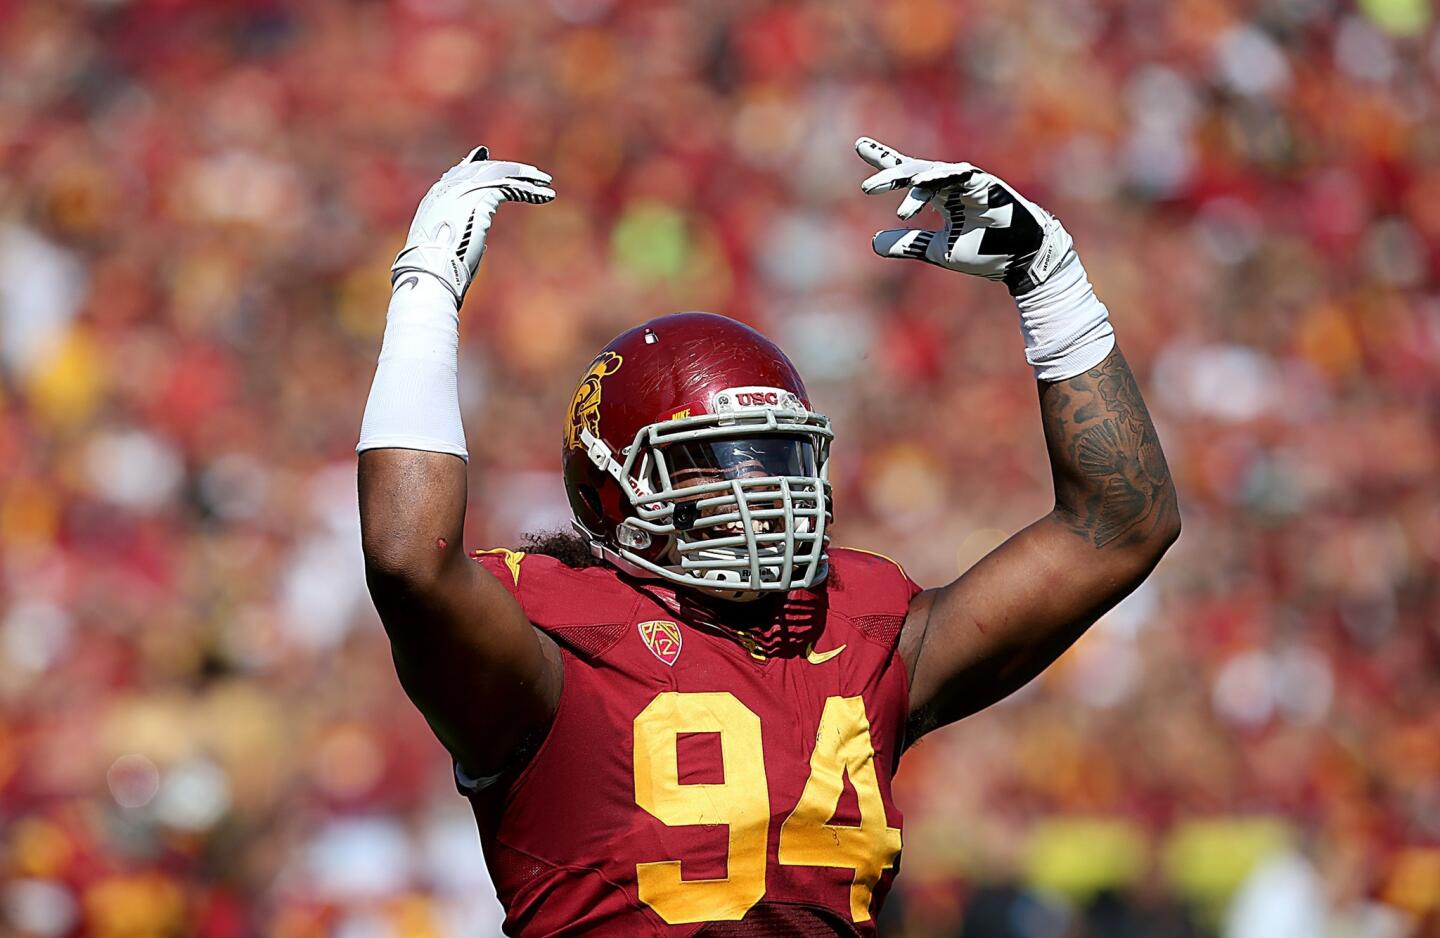 USC defensive end Leonard Williams urges Trojans fans to make noise during the third quarter Saturday at the Coliseum. USC would go on to defeat Utah State, 17-14, in the nonconference game.